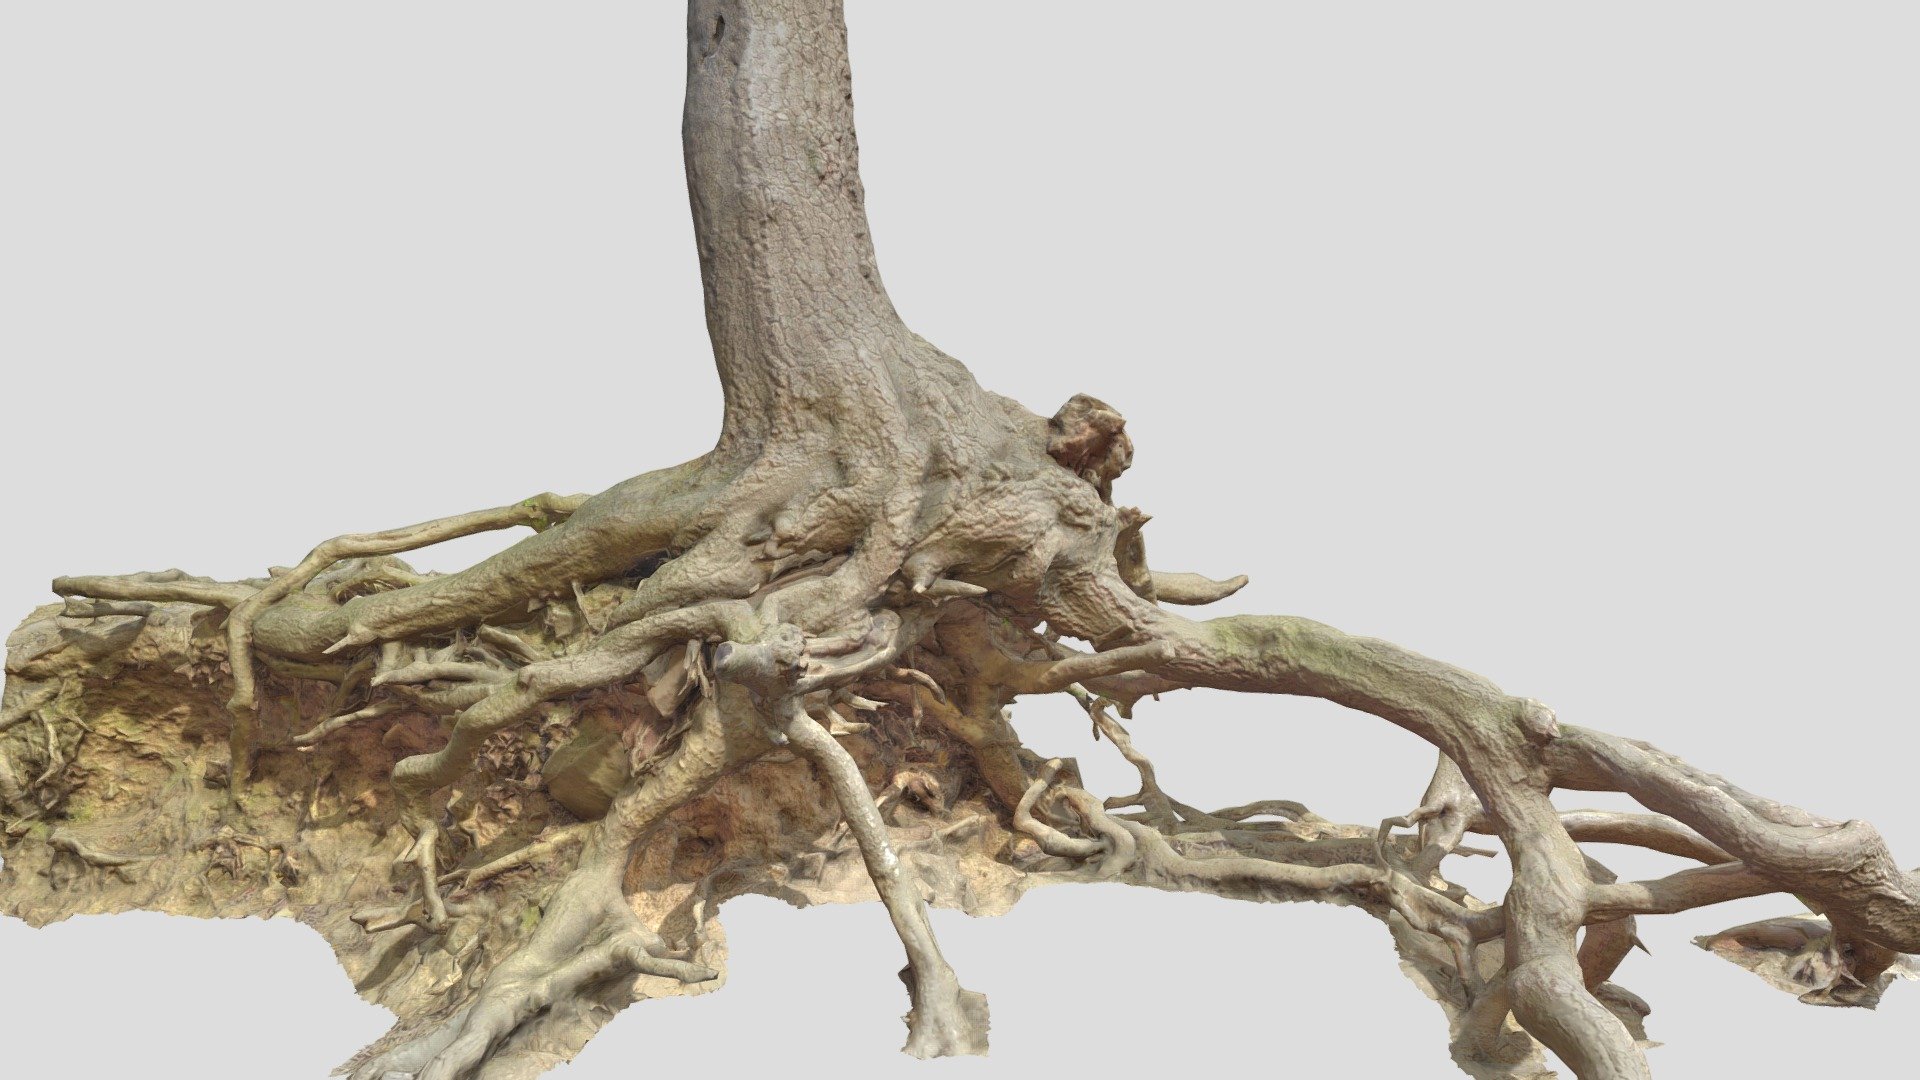 Fully processed 3D scans: no light information, color-matched, etc.

Ready to use for all kind of CGI

Source Contains:
- .obj
- .fbx
- .blend

8K Textures:
- normal map
- albedo
- roughness

Please let me know if something isn't working as it should.

Realistic Oak Roots Big Scan Overhang - Oak Roots Big Scan - Buy Royalty Free 3D model by Per's Scan Collection (@perz_scans) 3d model